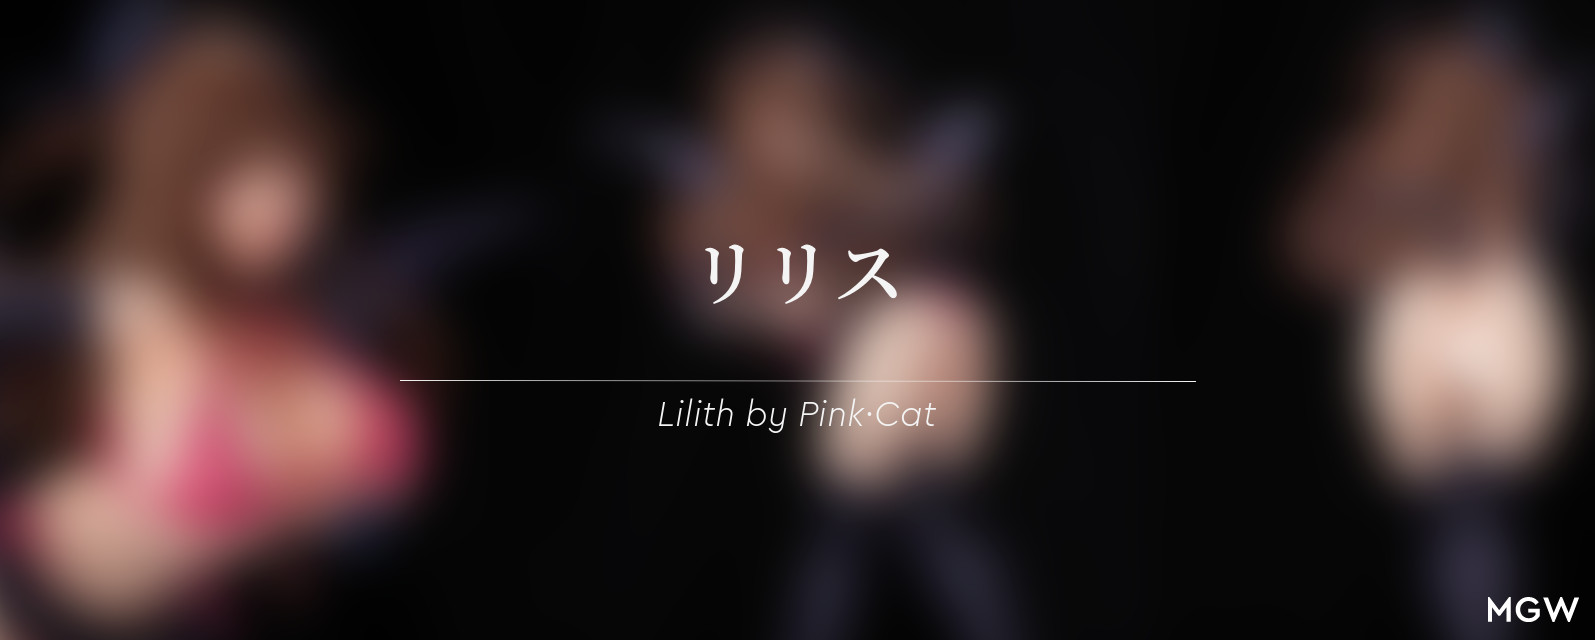 Lilith by Pink・Cat with Illustration by Mataro